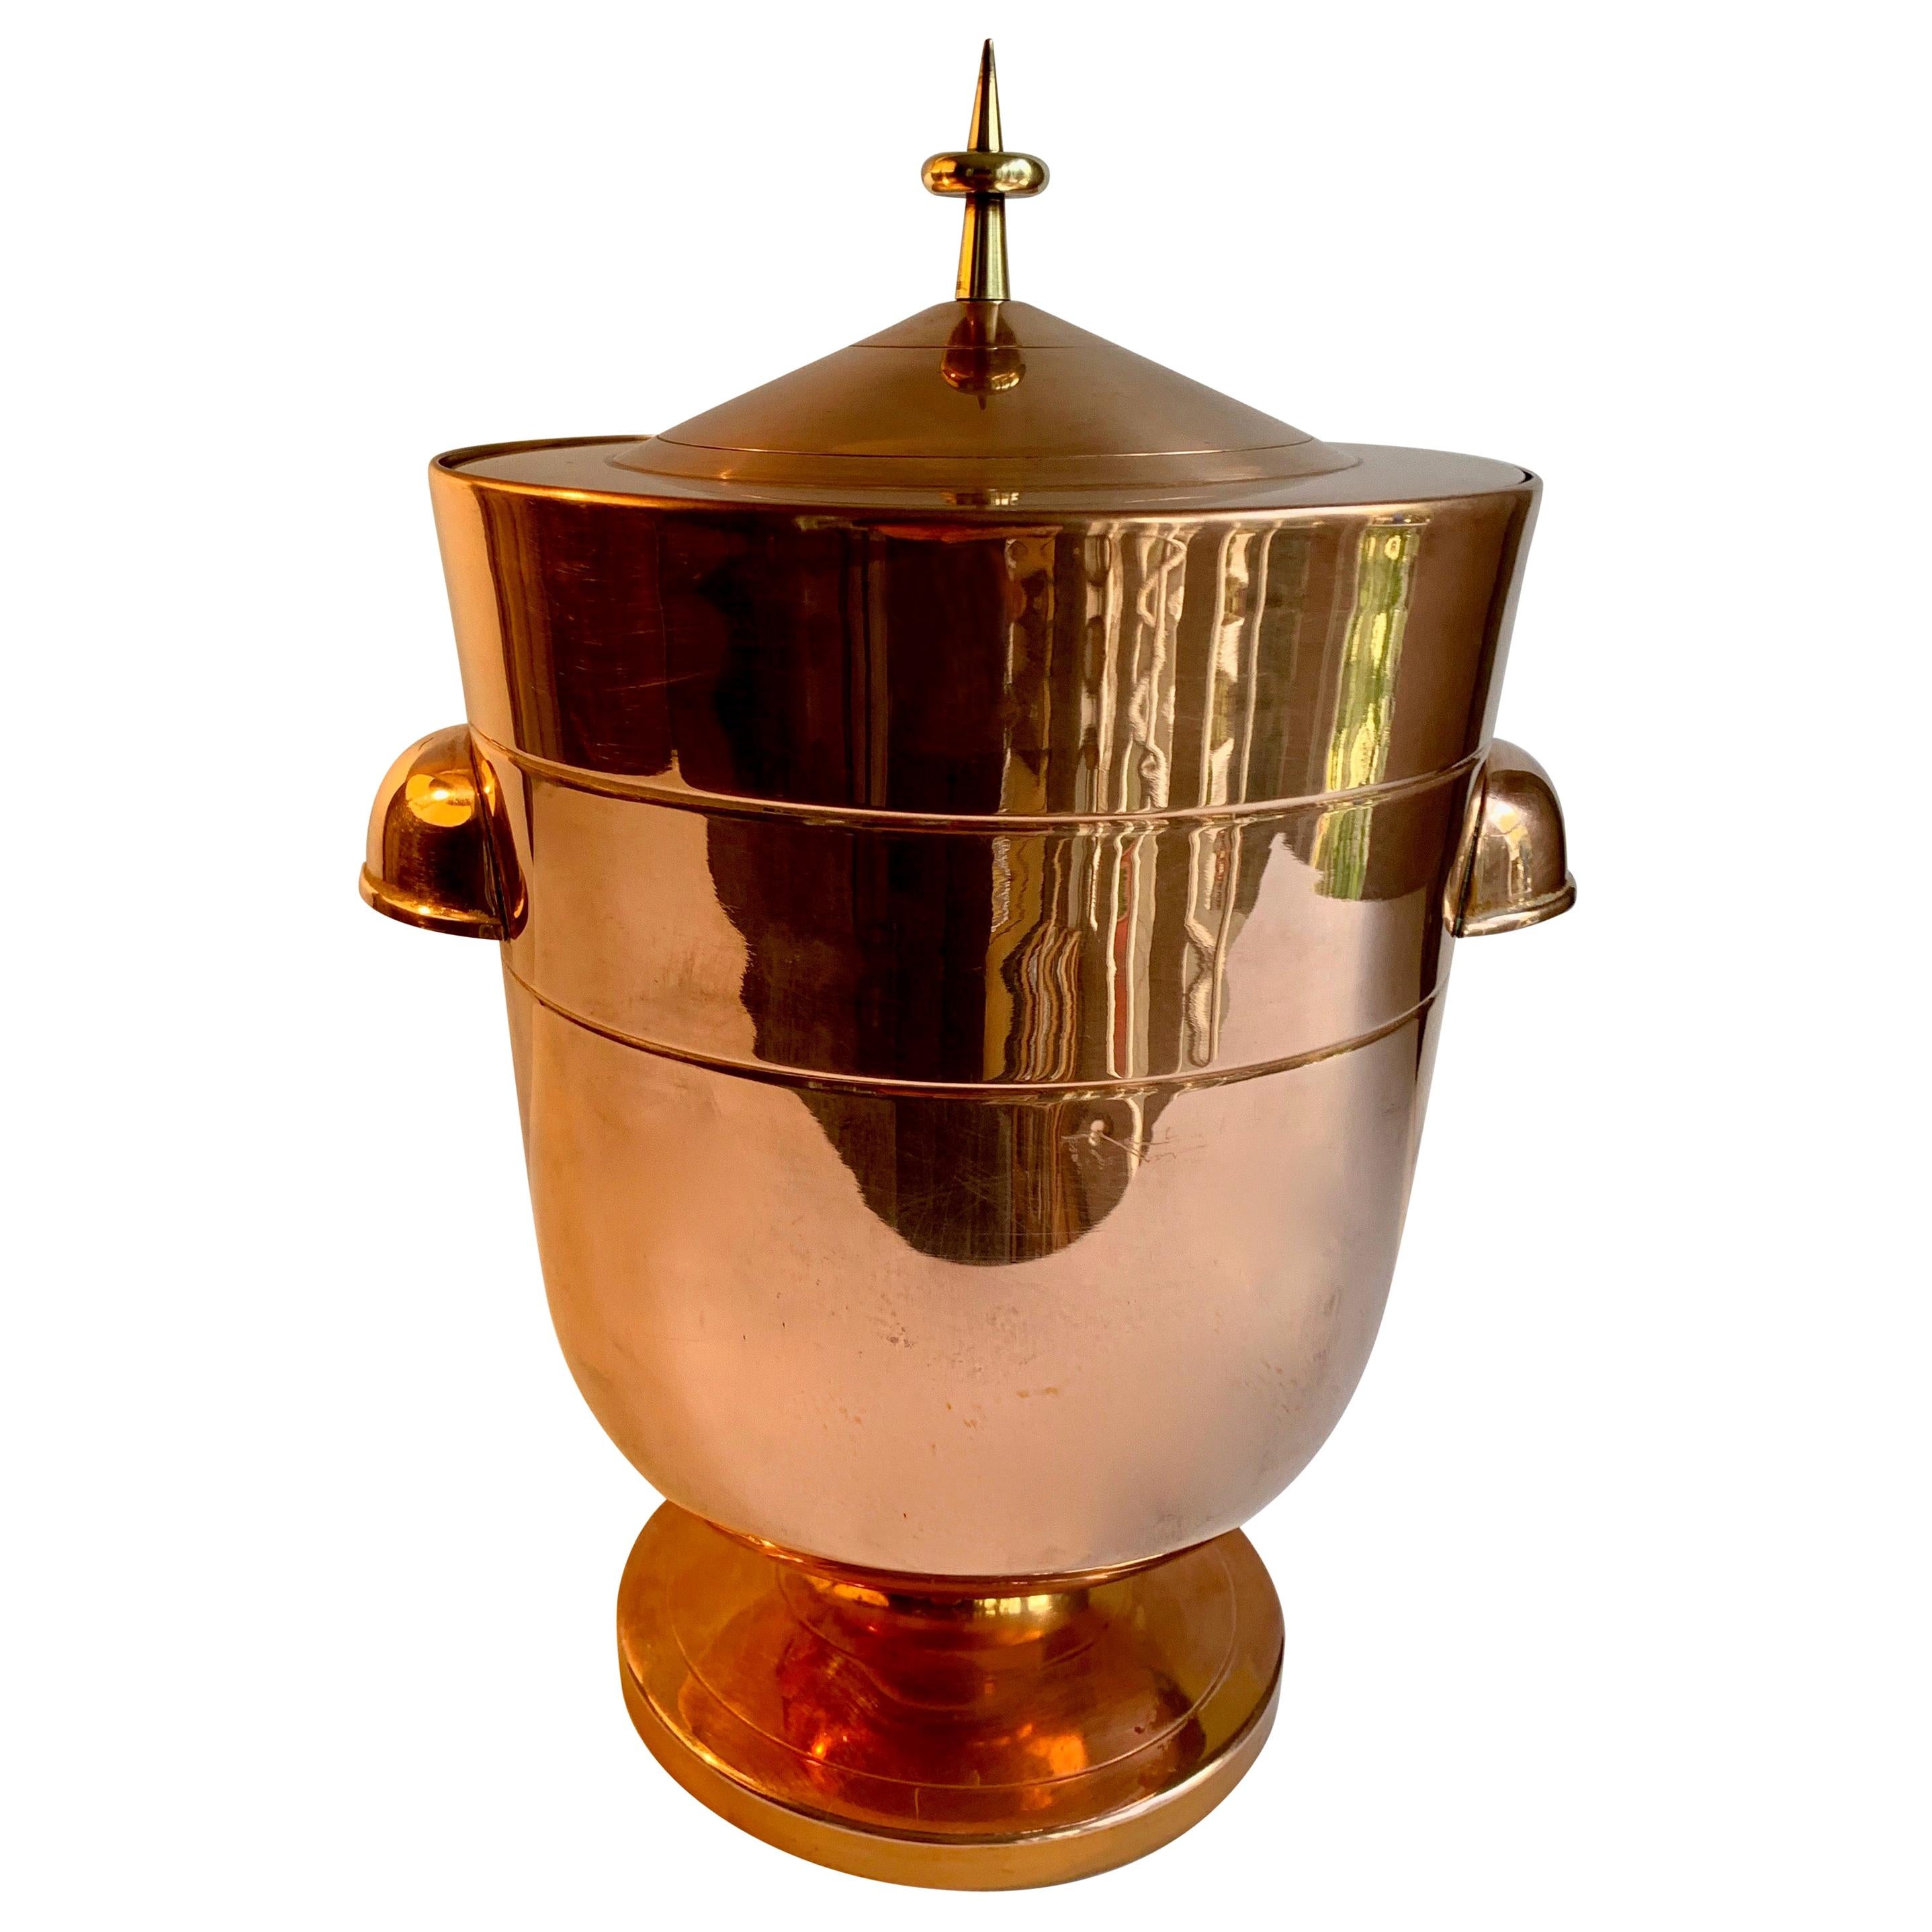 A wonderful Mid-Century Modern ice bucket by Iconic desinger, Tommi Parzinger. The piece has been freshly polished - a statement piece for any bar with a lovely brass finial atop. A must have for any midcentury bar.